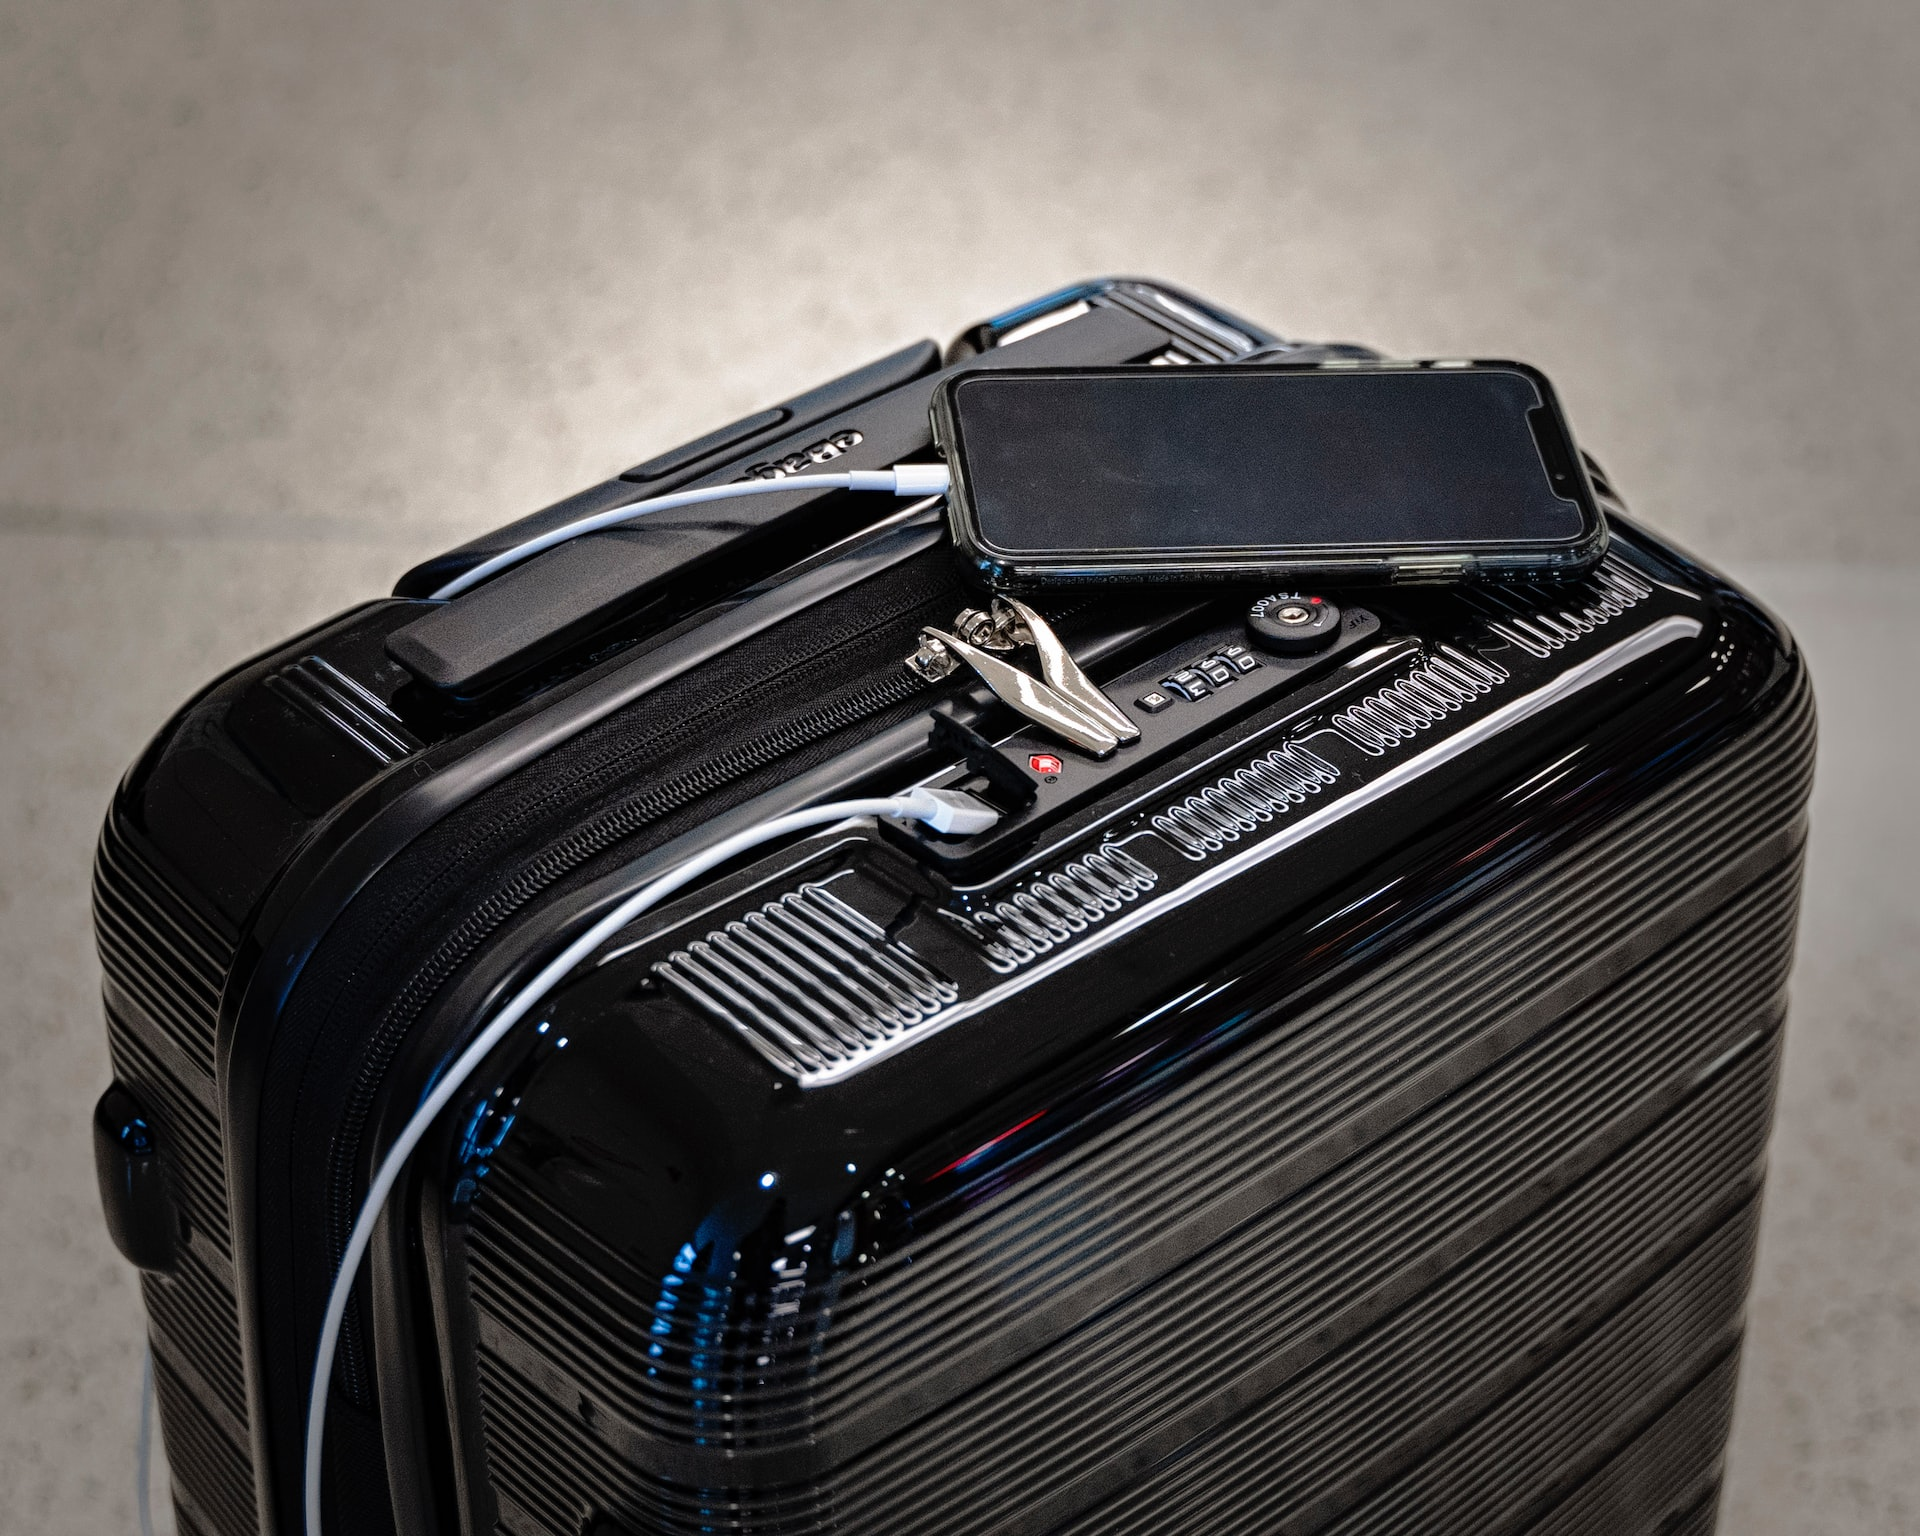 A phone charging from a power bank in a suitcase.